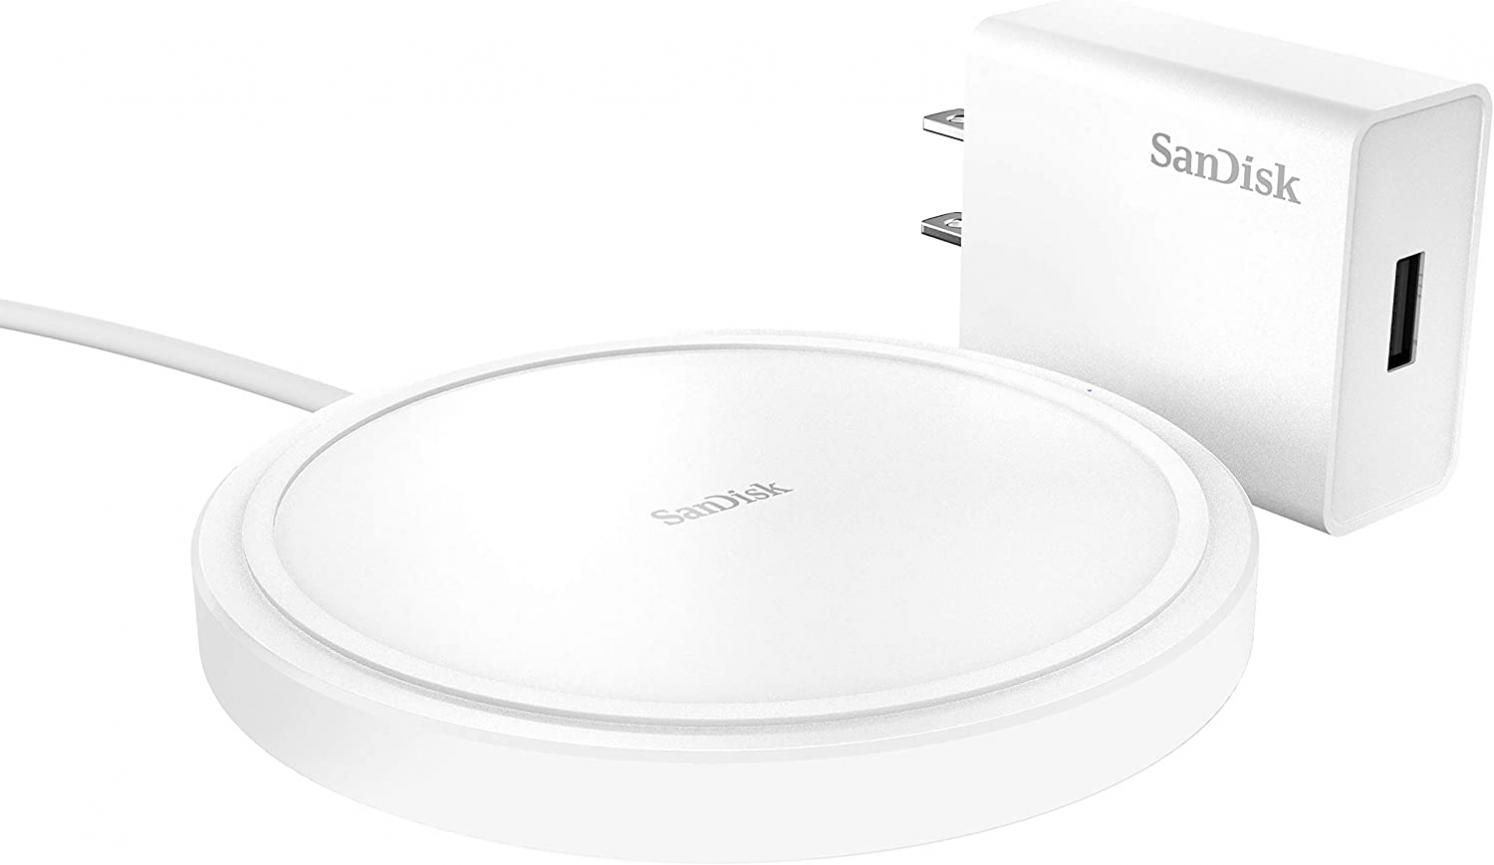 SanDisk Ixpand Wireless Charger 15W (includes Quick Charge adapter + USB Type-C cable) - Wireless charging pad for Qi-compatible smart phones and devices - SDIZB0N-000G-ANCLN